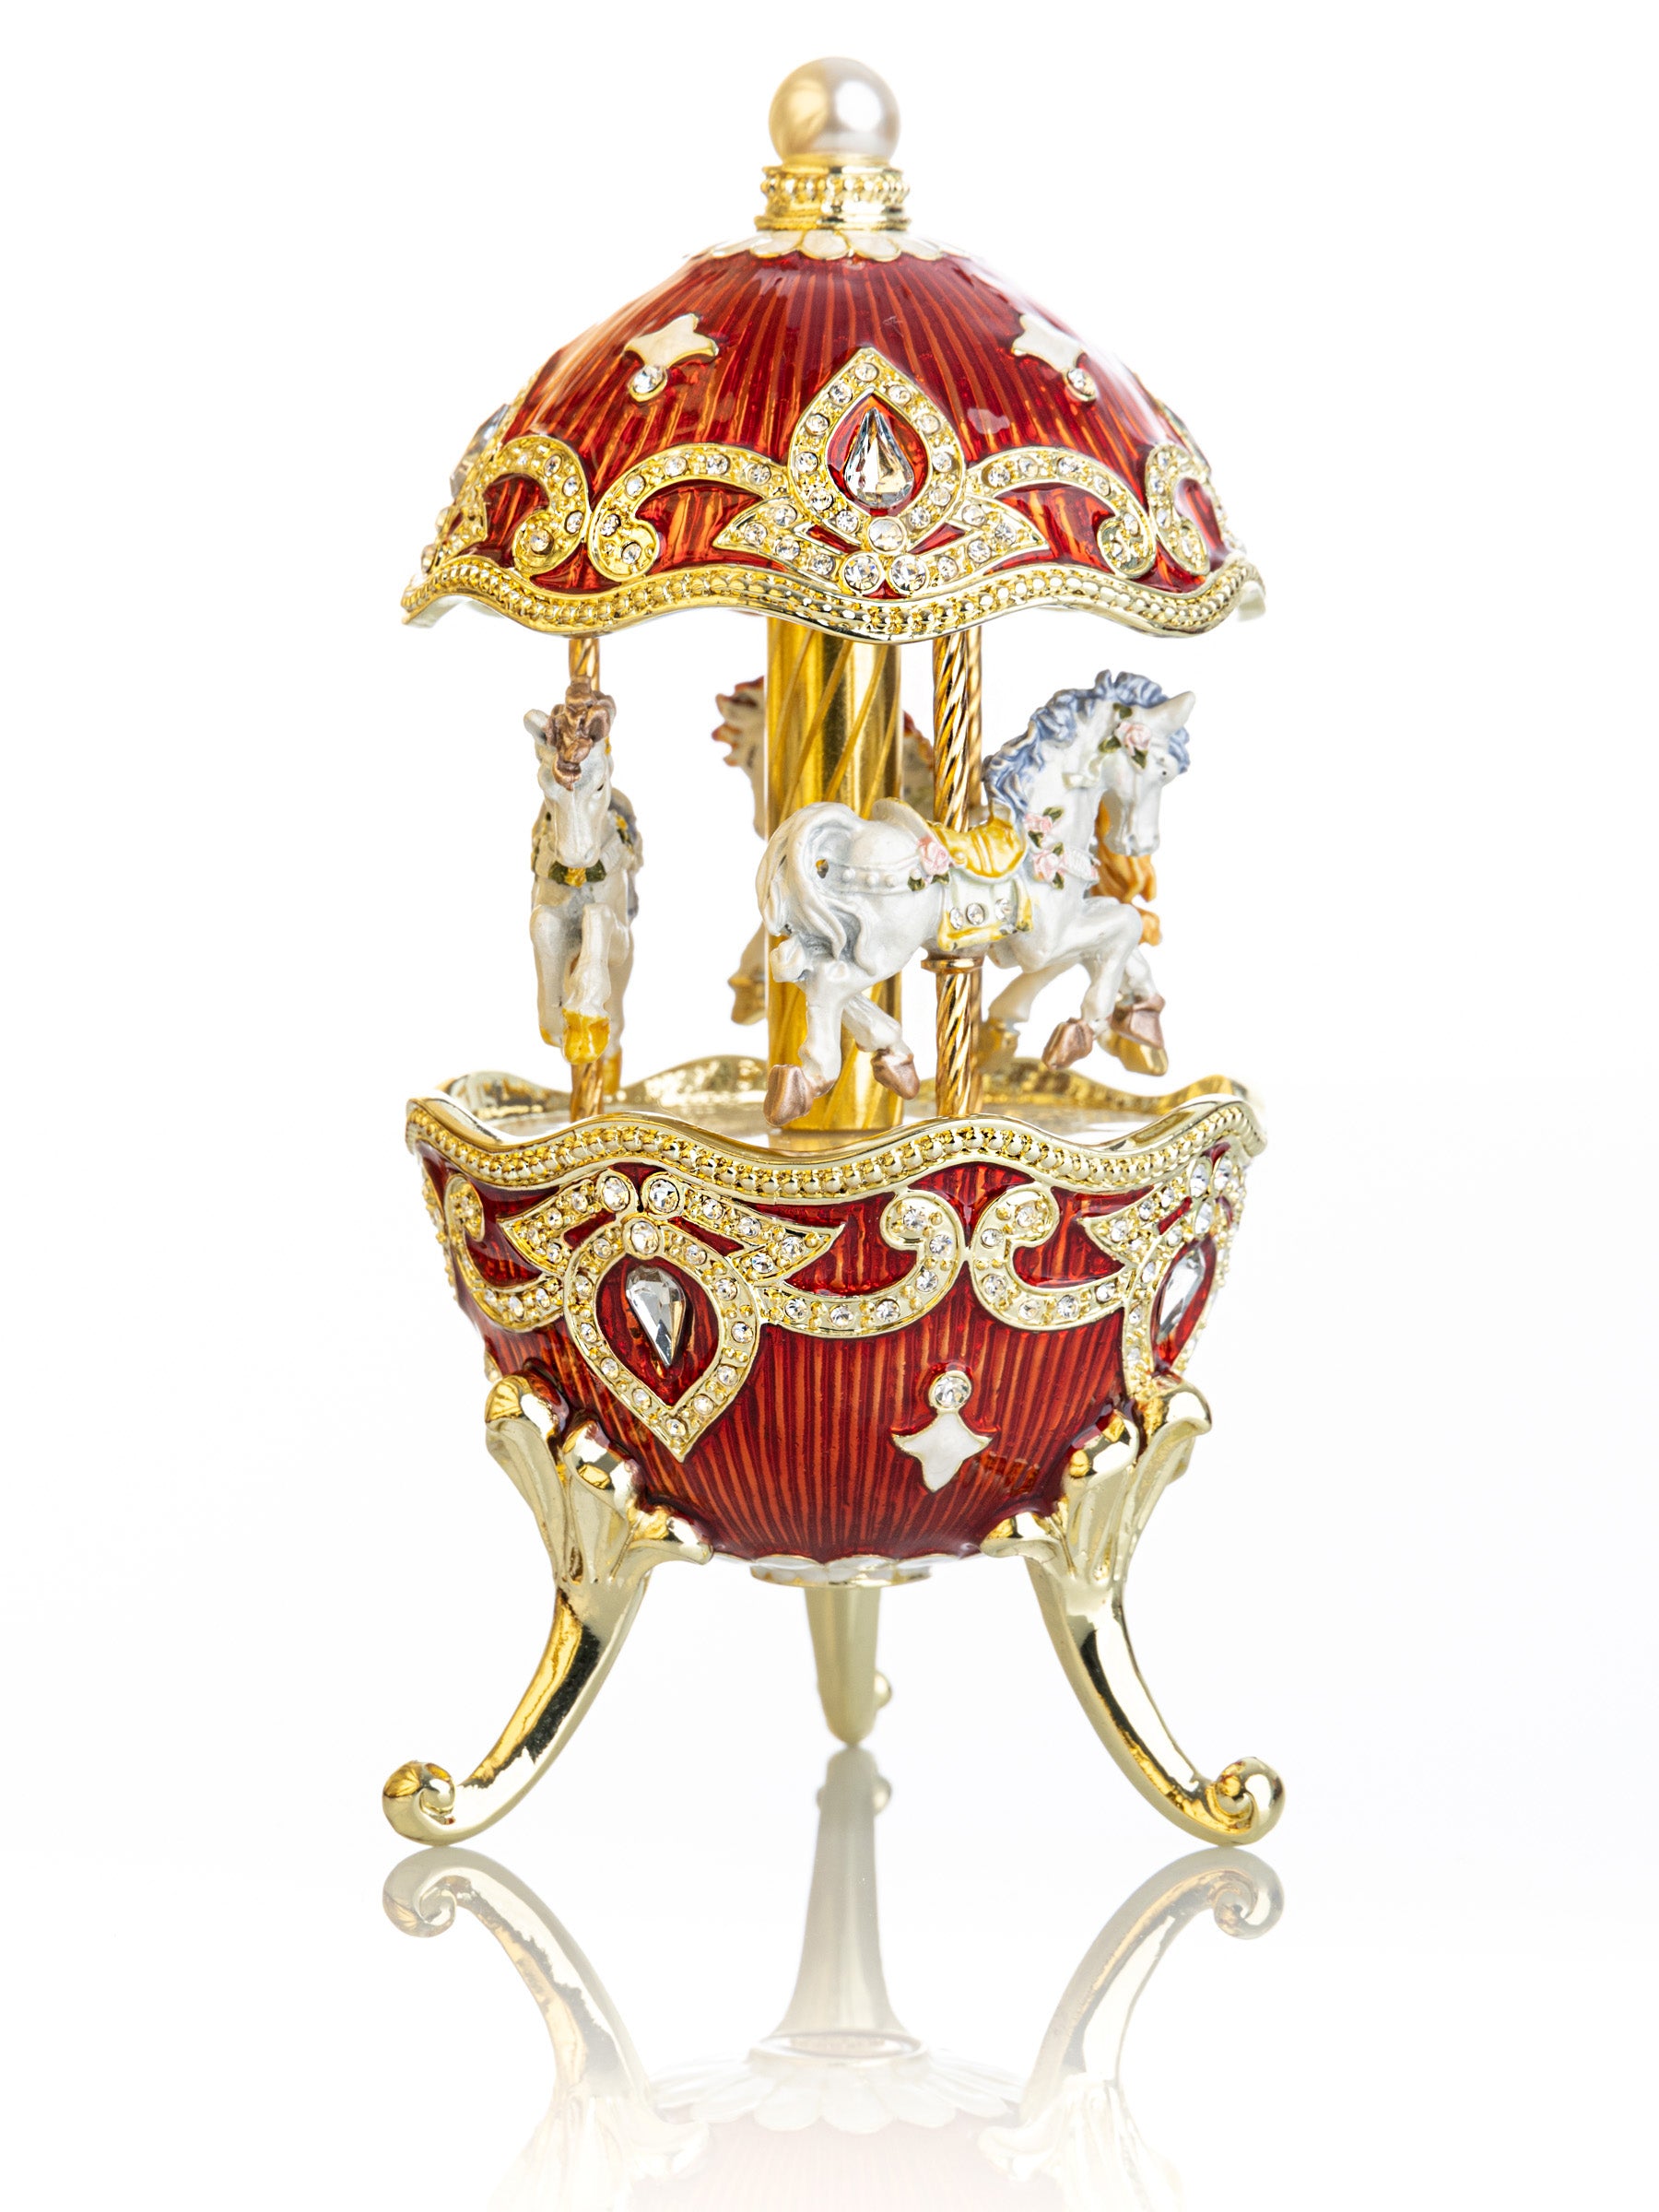 Red Wind up Horse Carousel Faberge Style Egg